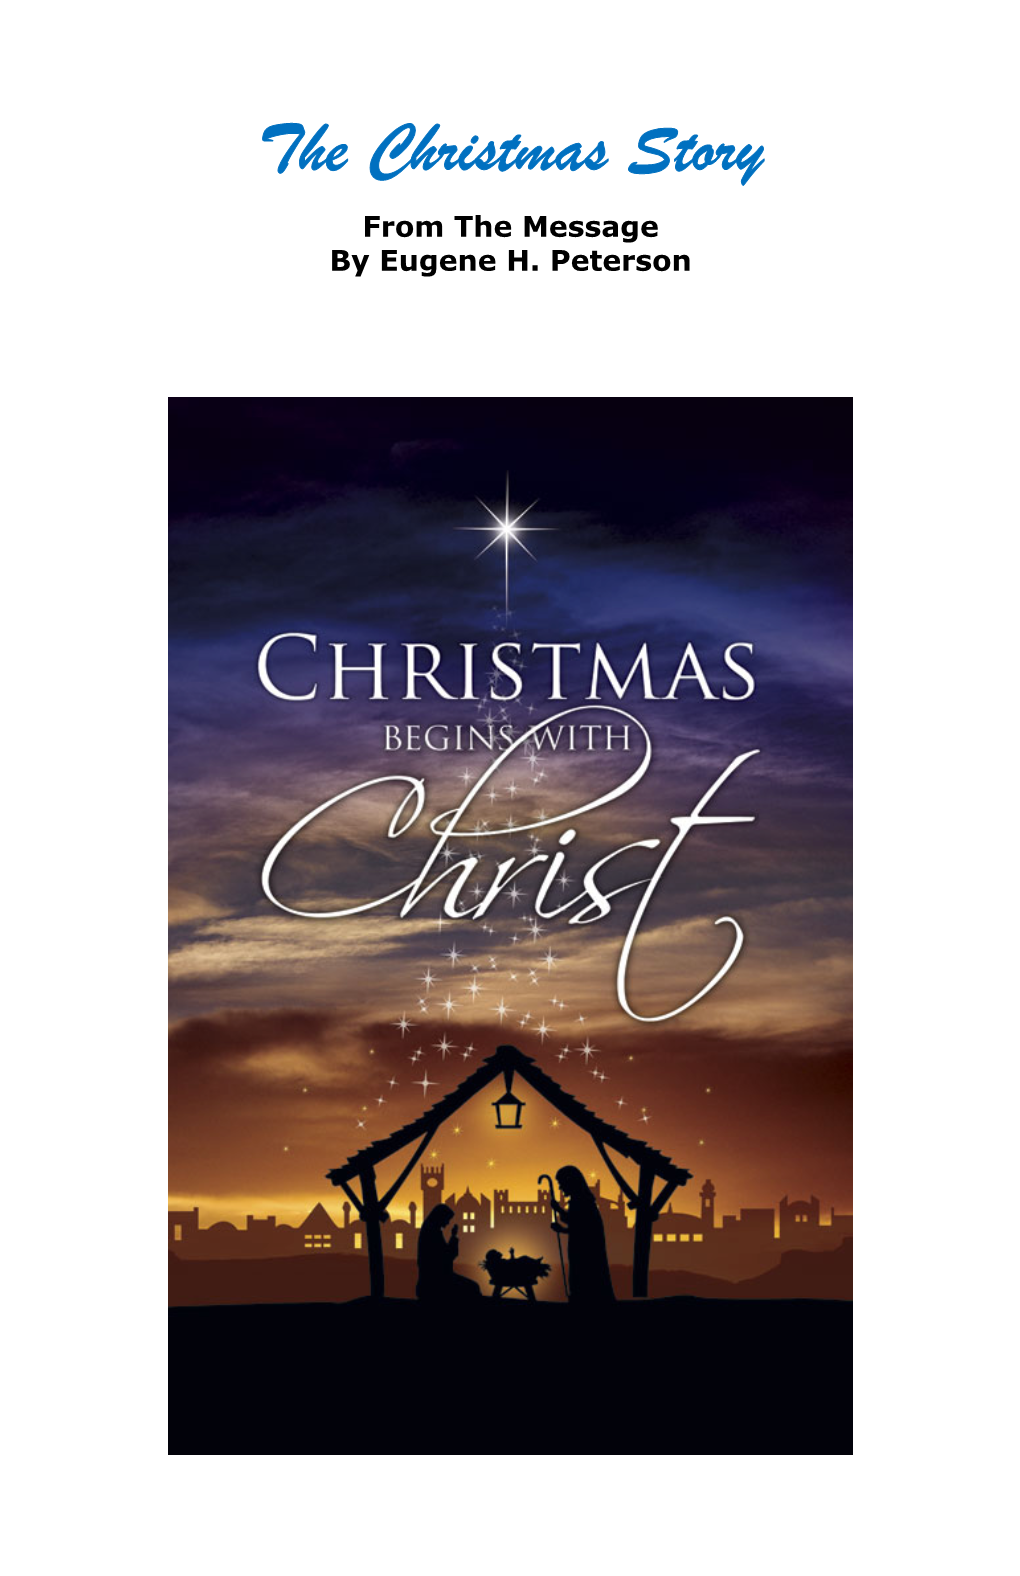 The Christmas Story from the Message by Eugene H